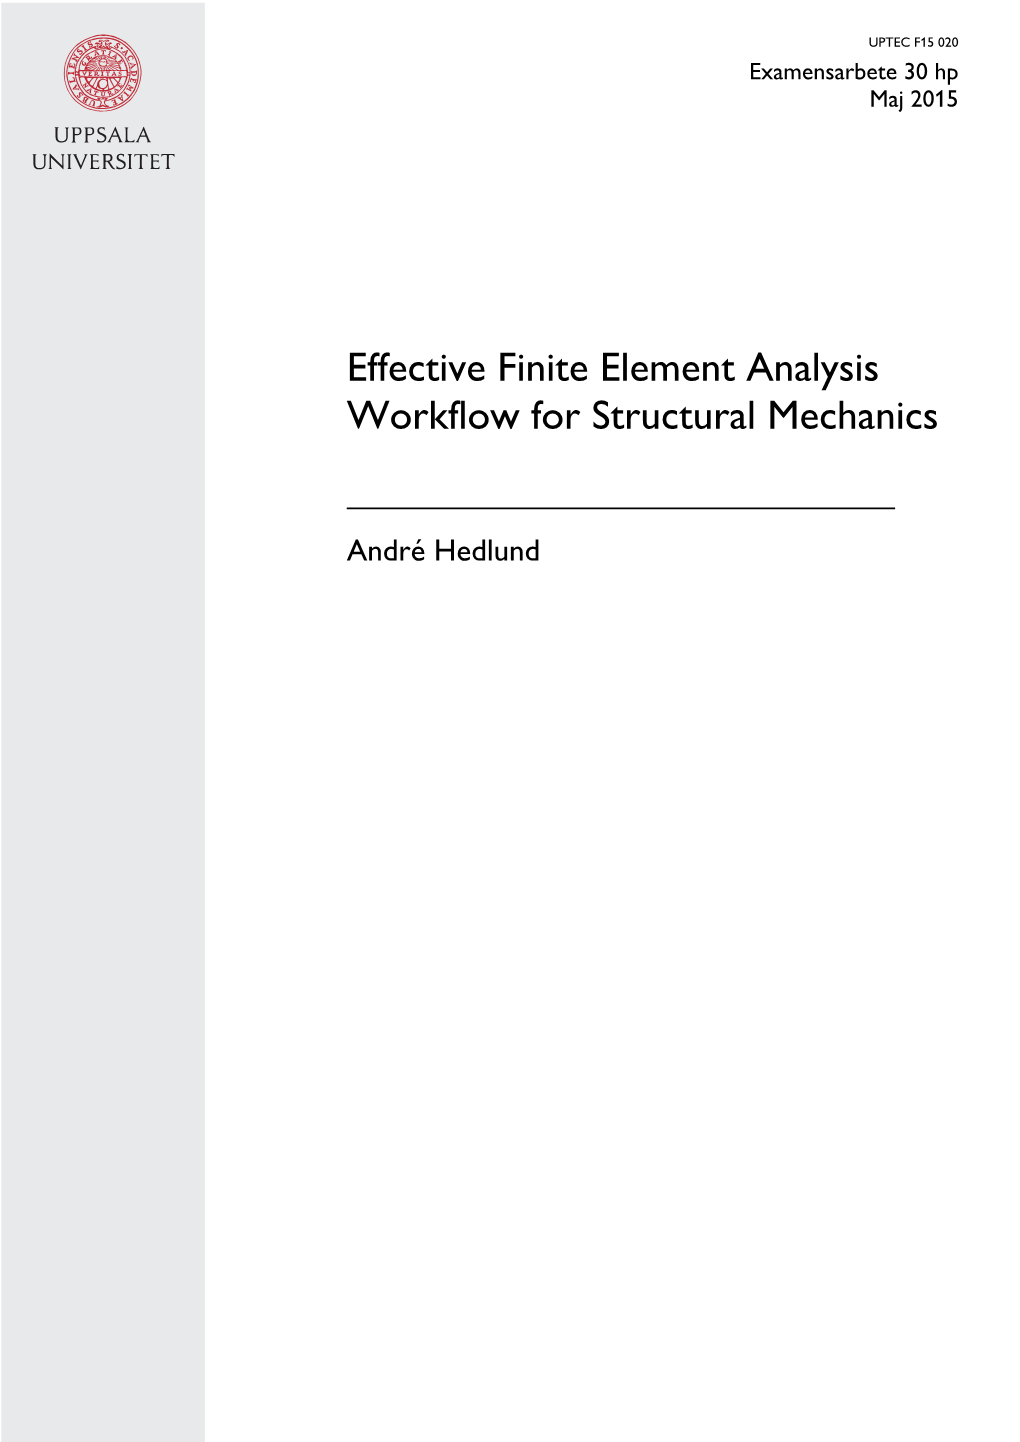 Effective Finite Element Analysis Workflow for Structural Mechanics